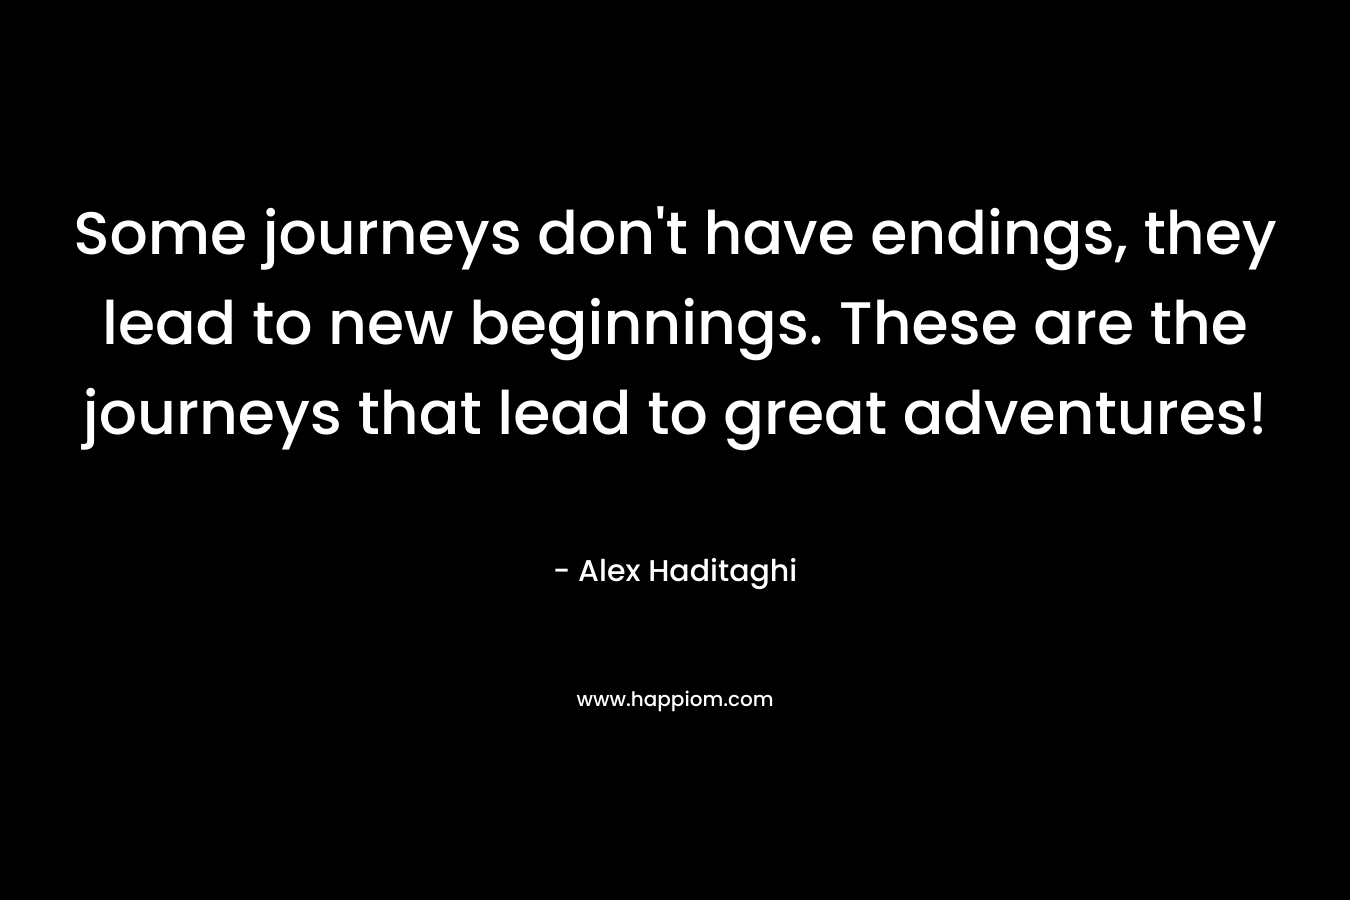 Some journeys don't have endings, they lead to new beginnings. These are the journeys that lead to great adventures!